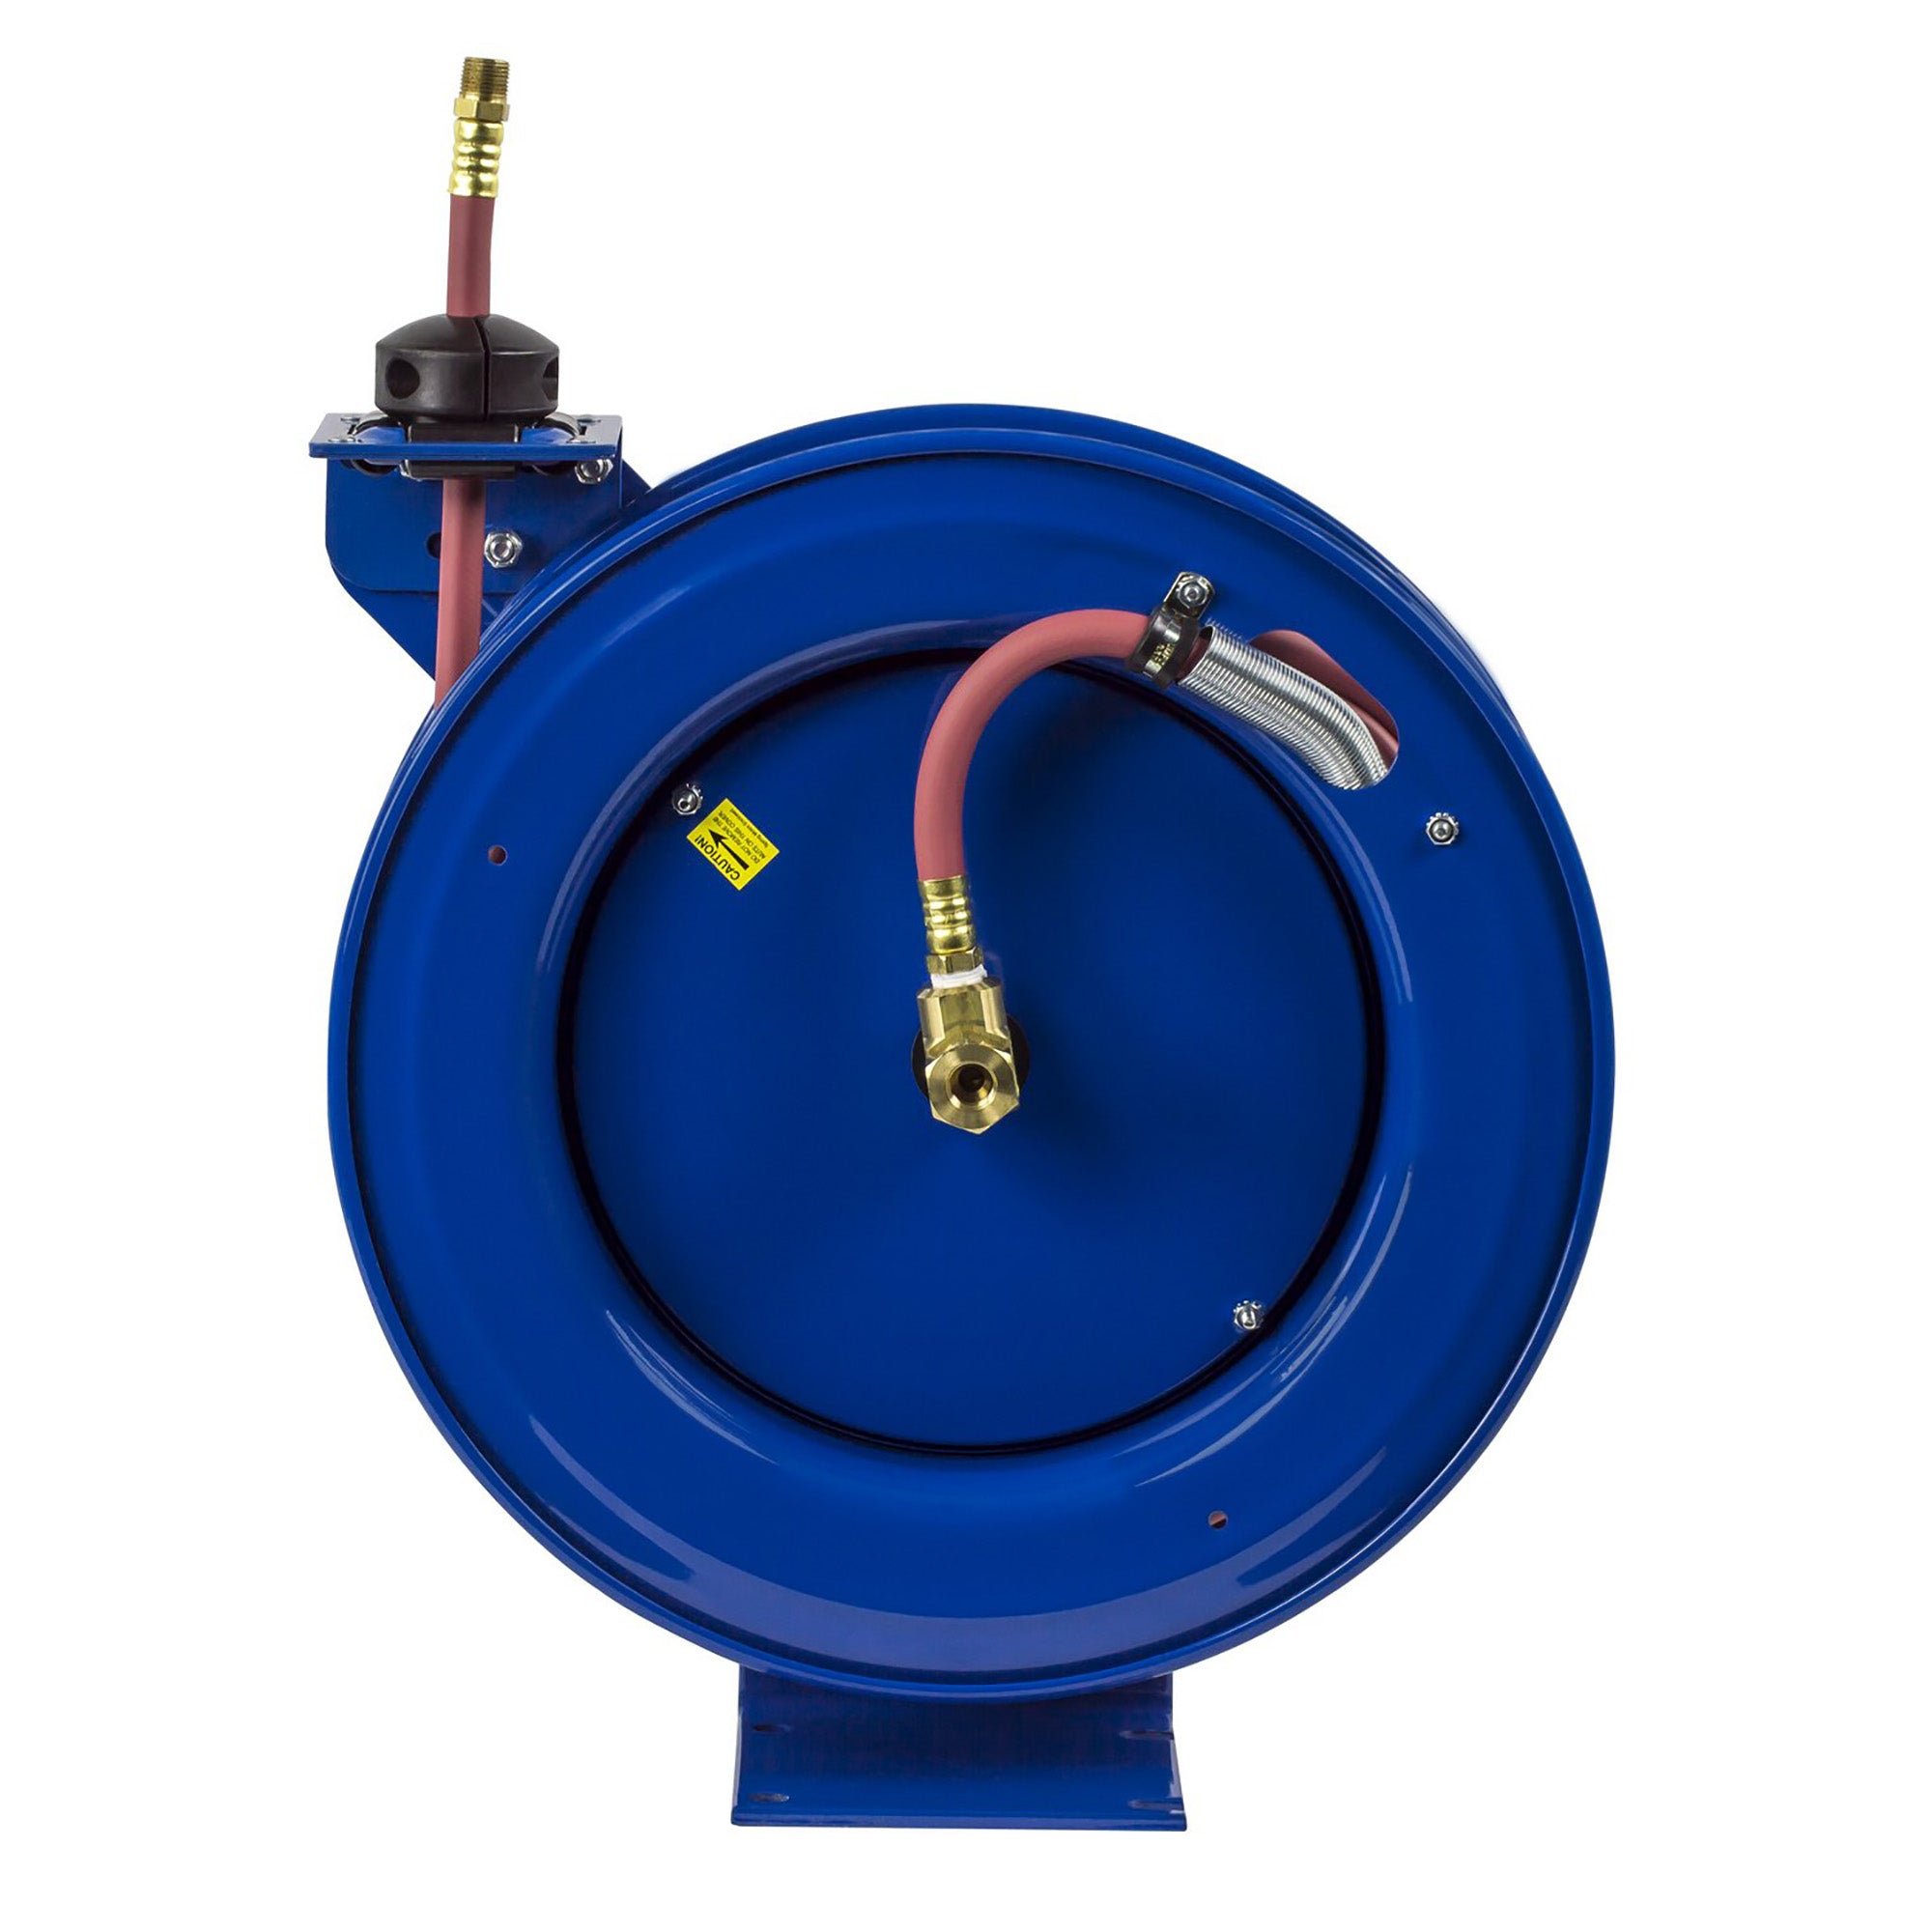 Coxreels P-LP-450 Low Pressure Retractable Air/Water Hose Reel: 1/2 I.D, 50' Hose Capacity, with Hose, 300 PSI, Made in USA